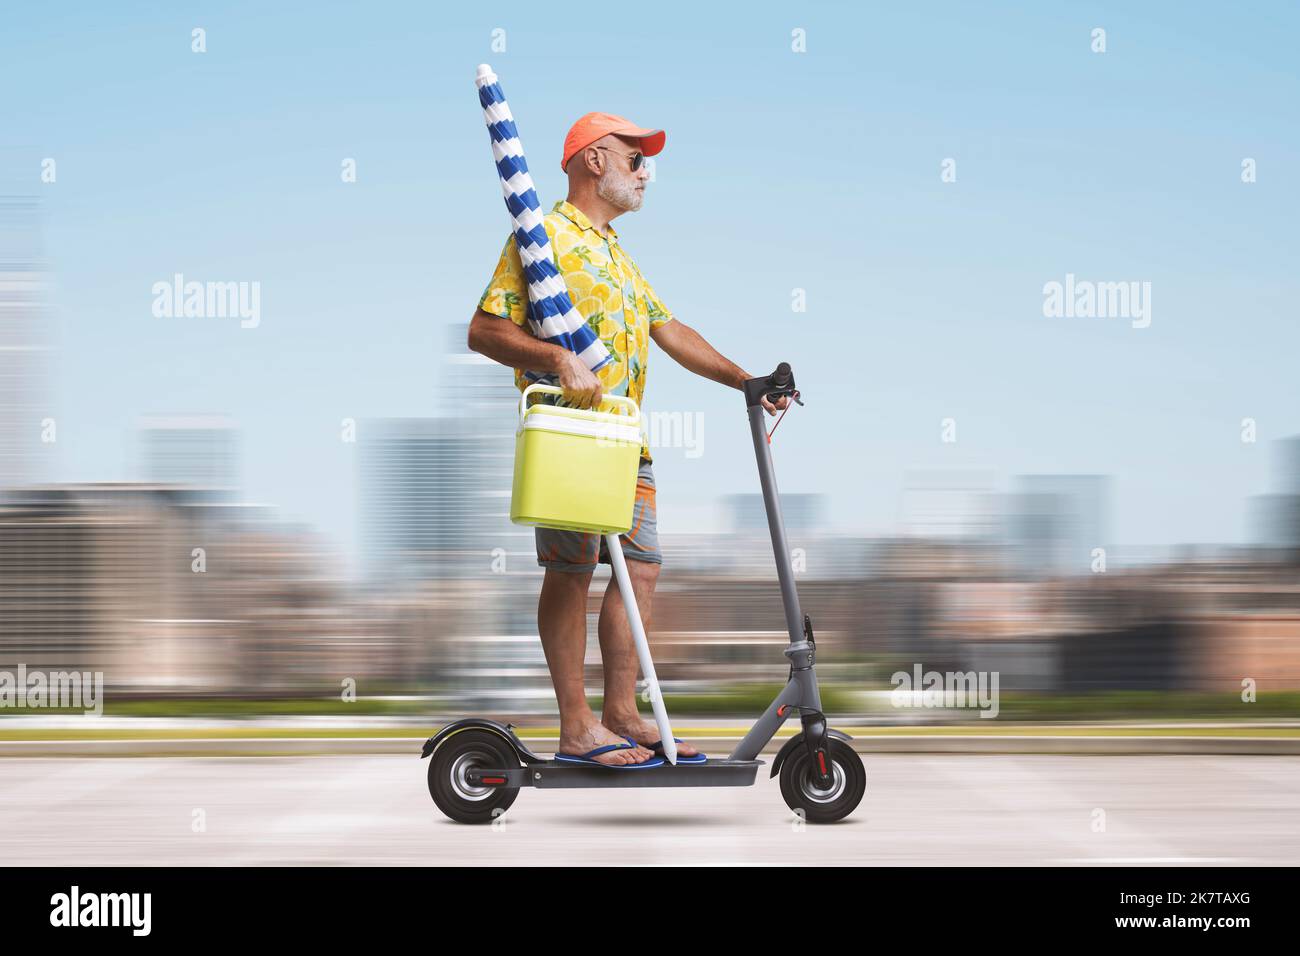 Funny senior man holding a beach umbrella and riding an electric scooter, he is going to the beach Stock Photo